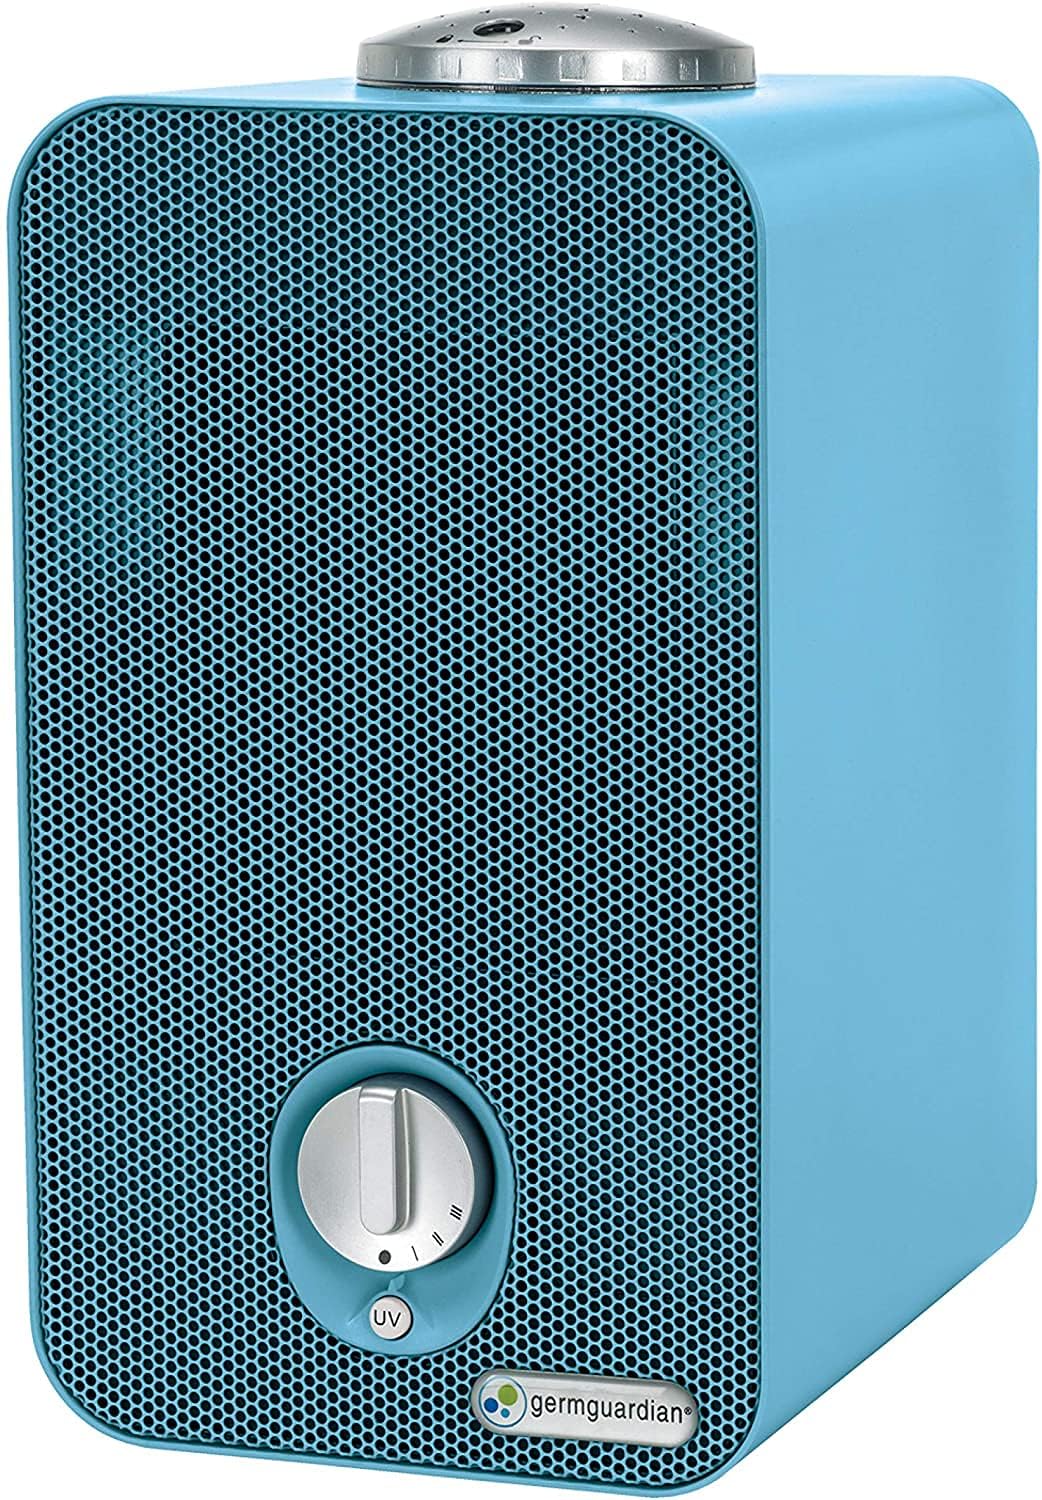 GermGuardian Air Purifier with HEPA Pure 13 Filter, Removes 99.97% of Pollutants, for Home, Small Rooms, Night Light Projector, V-C Light Helps Reduce Germs, Zero Ozone Verified, 11", Blue, AC4150